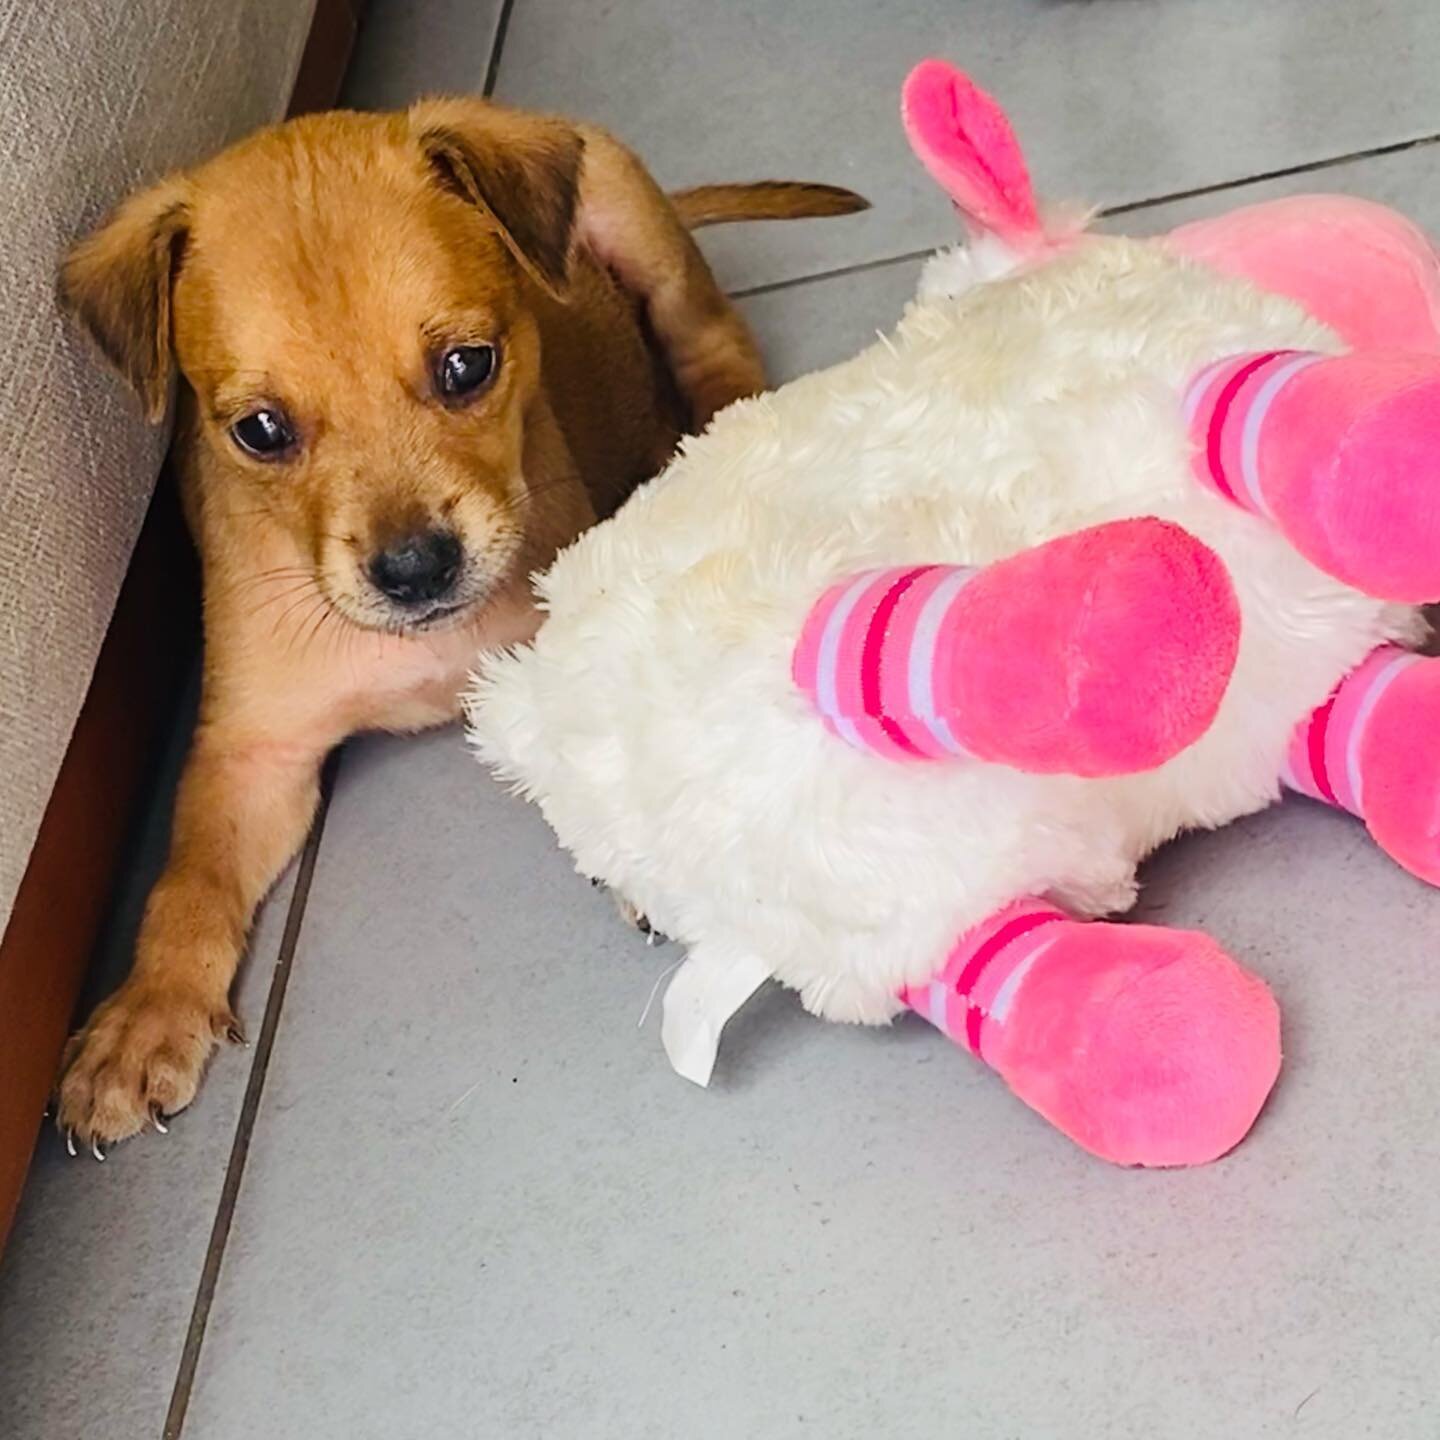 Little Jamie 
abandoned in the streets about 5 weeks old needs a forever loving home !!

Adopt#puppylove #lovedogs❤ #readyforadoption #rescuedog #cutedoggy